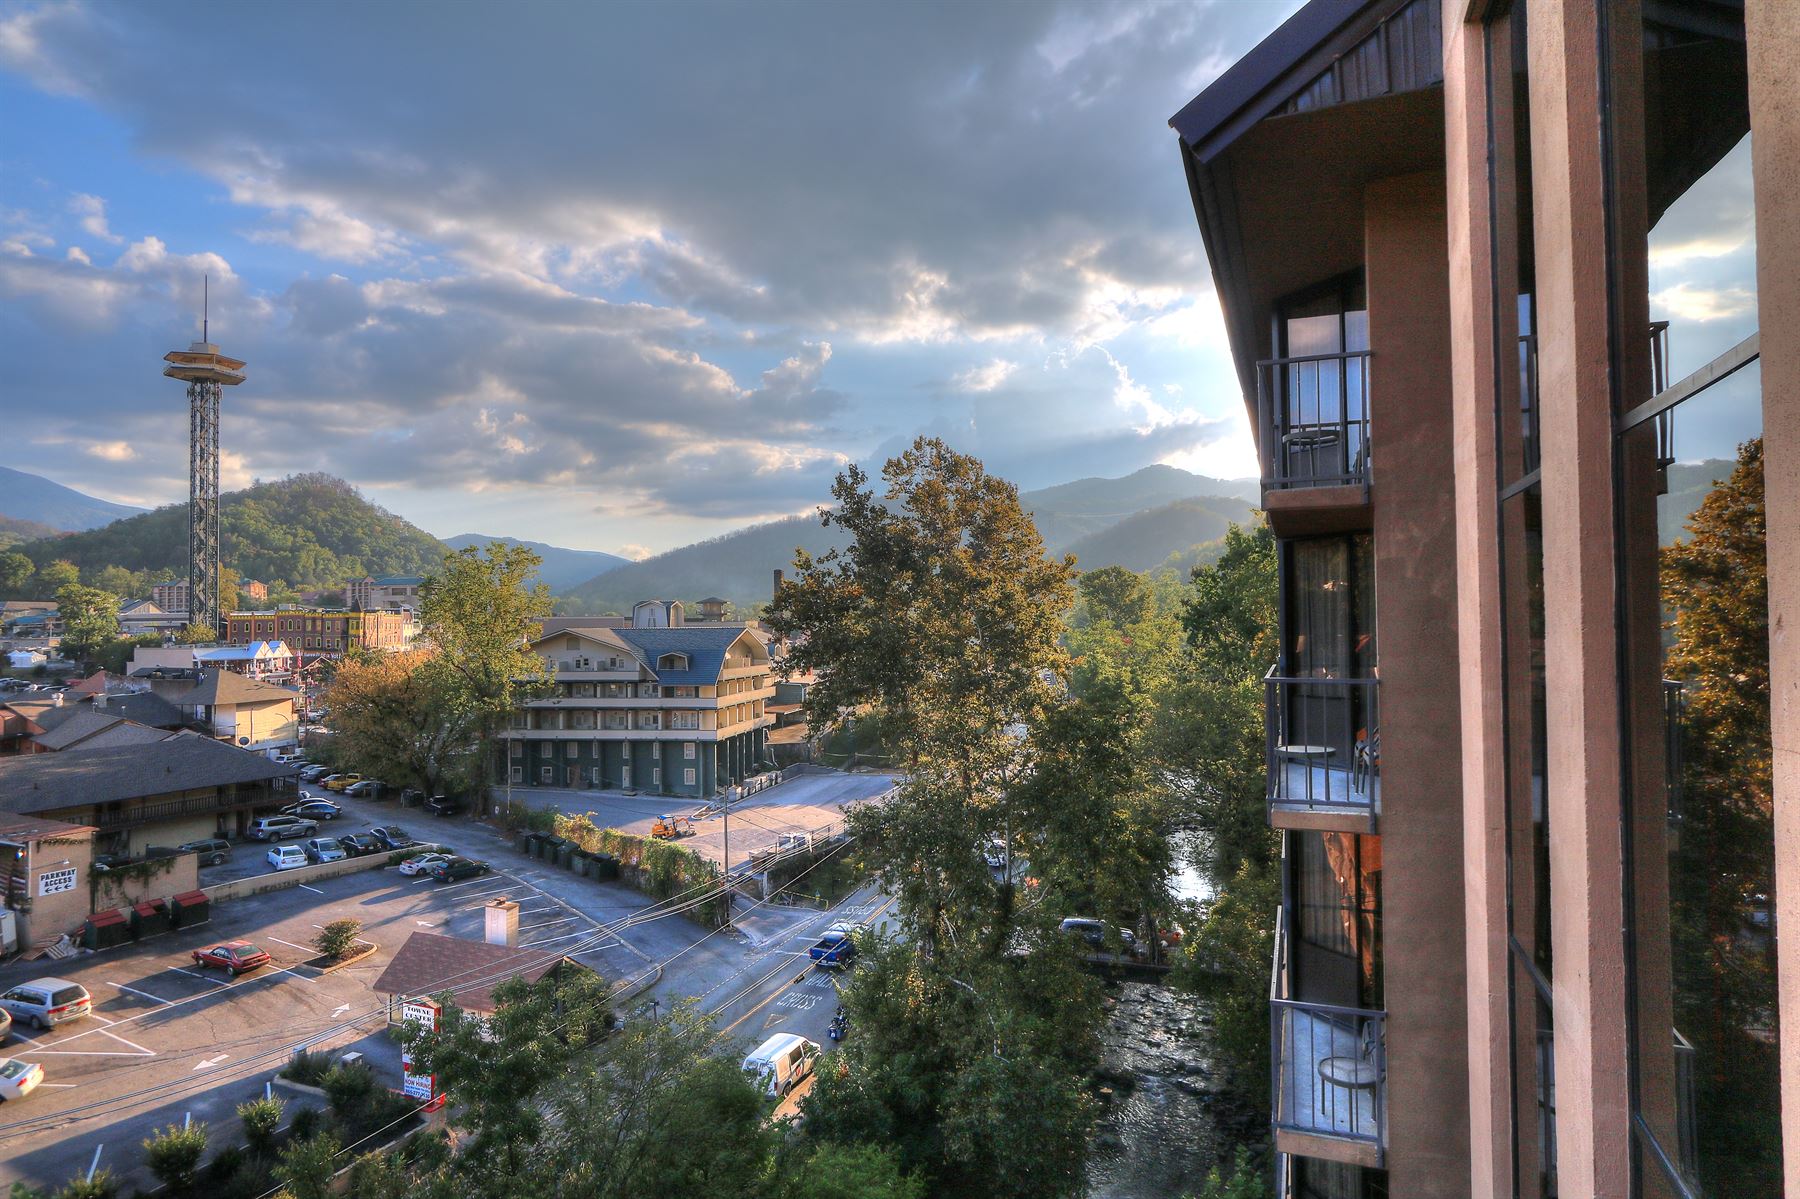 6 Perks Of Staying In Our Hotel In Downtown Gatlinburg TN